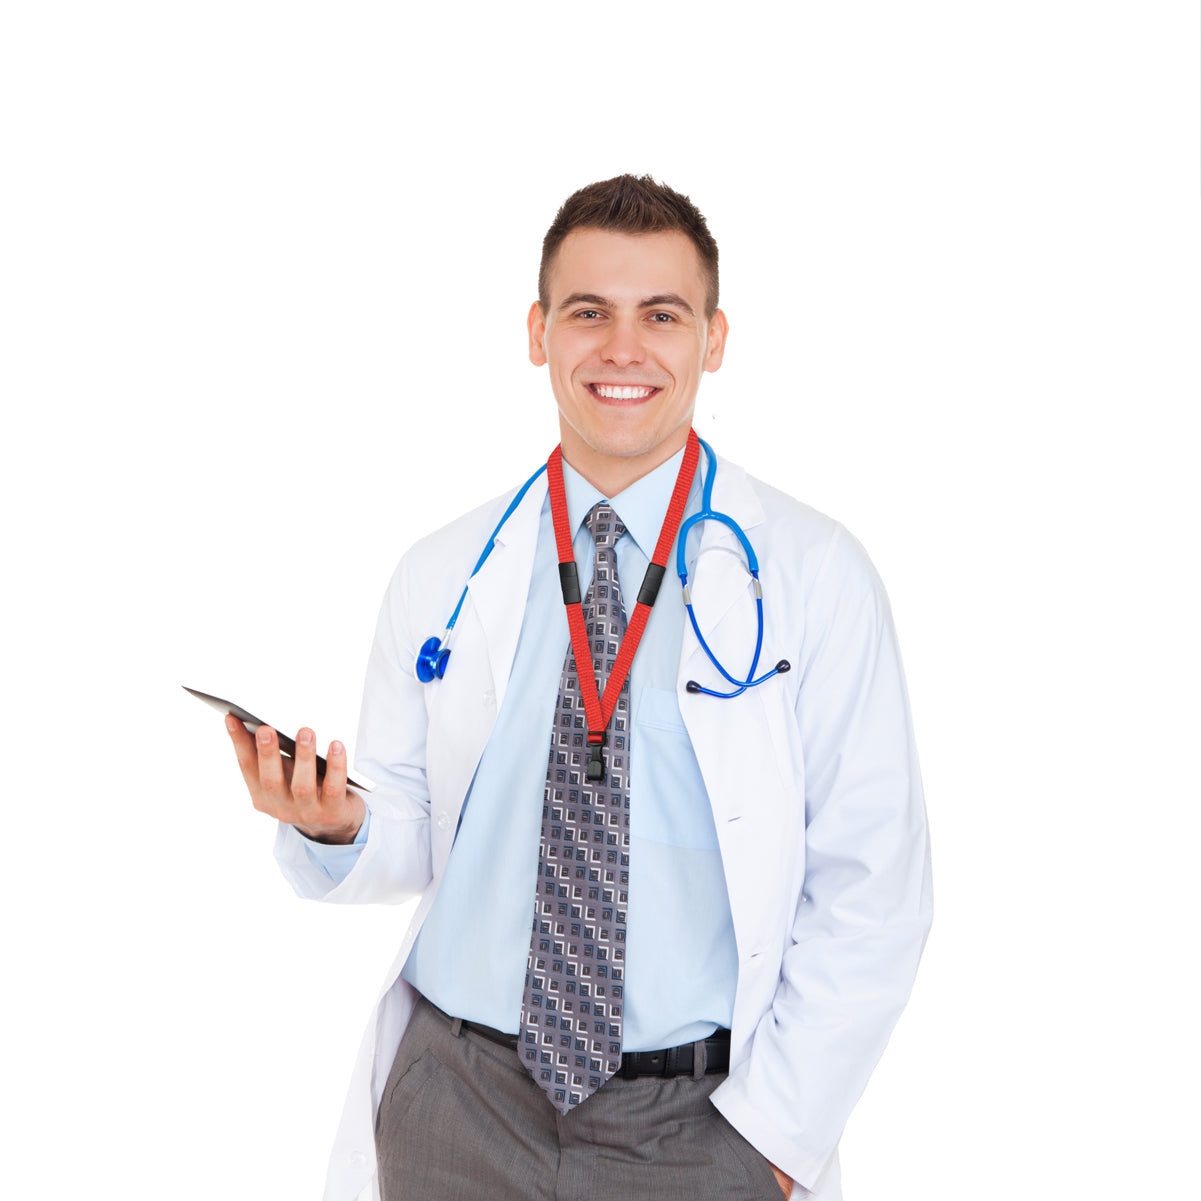 Doctor in white coat, holding a smartphone in his right hand, stethoscope around neck with a Triple Breakaway Lanyard with THREE Safety Breakaway Points (2137-300X), smiling, standing against a plain white background.